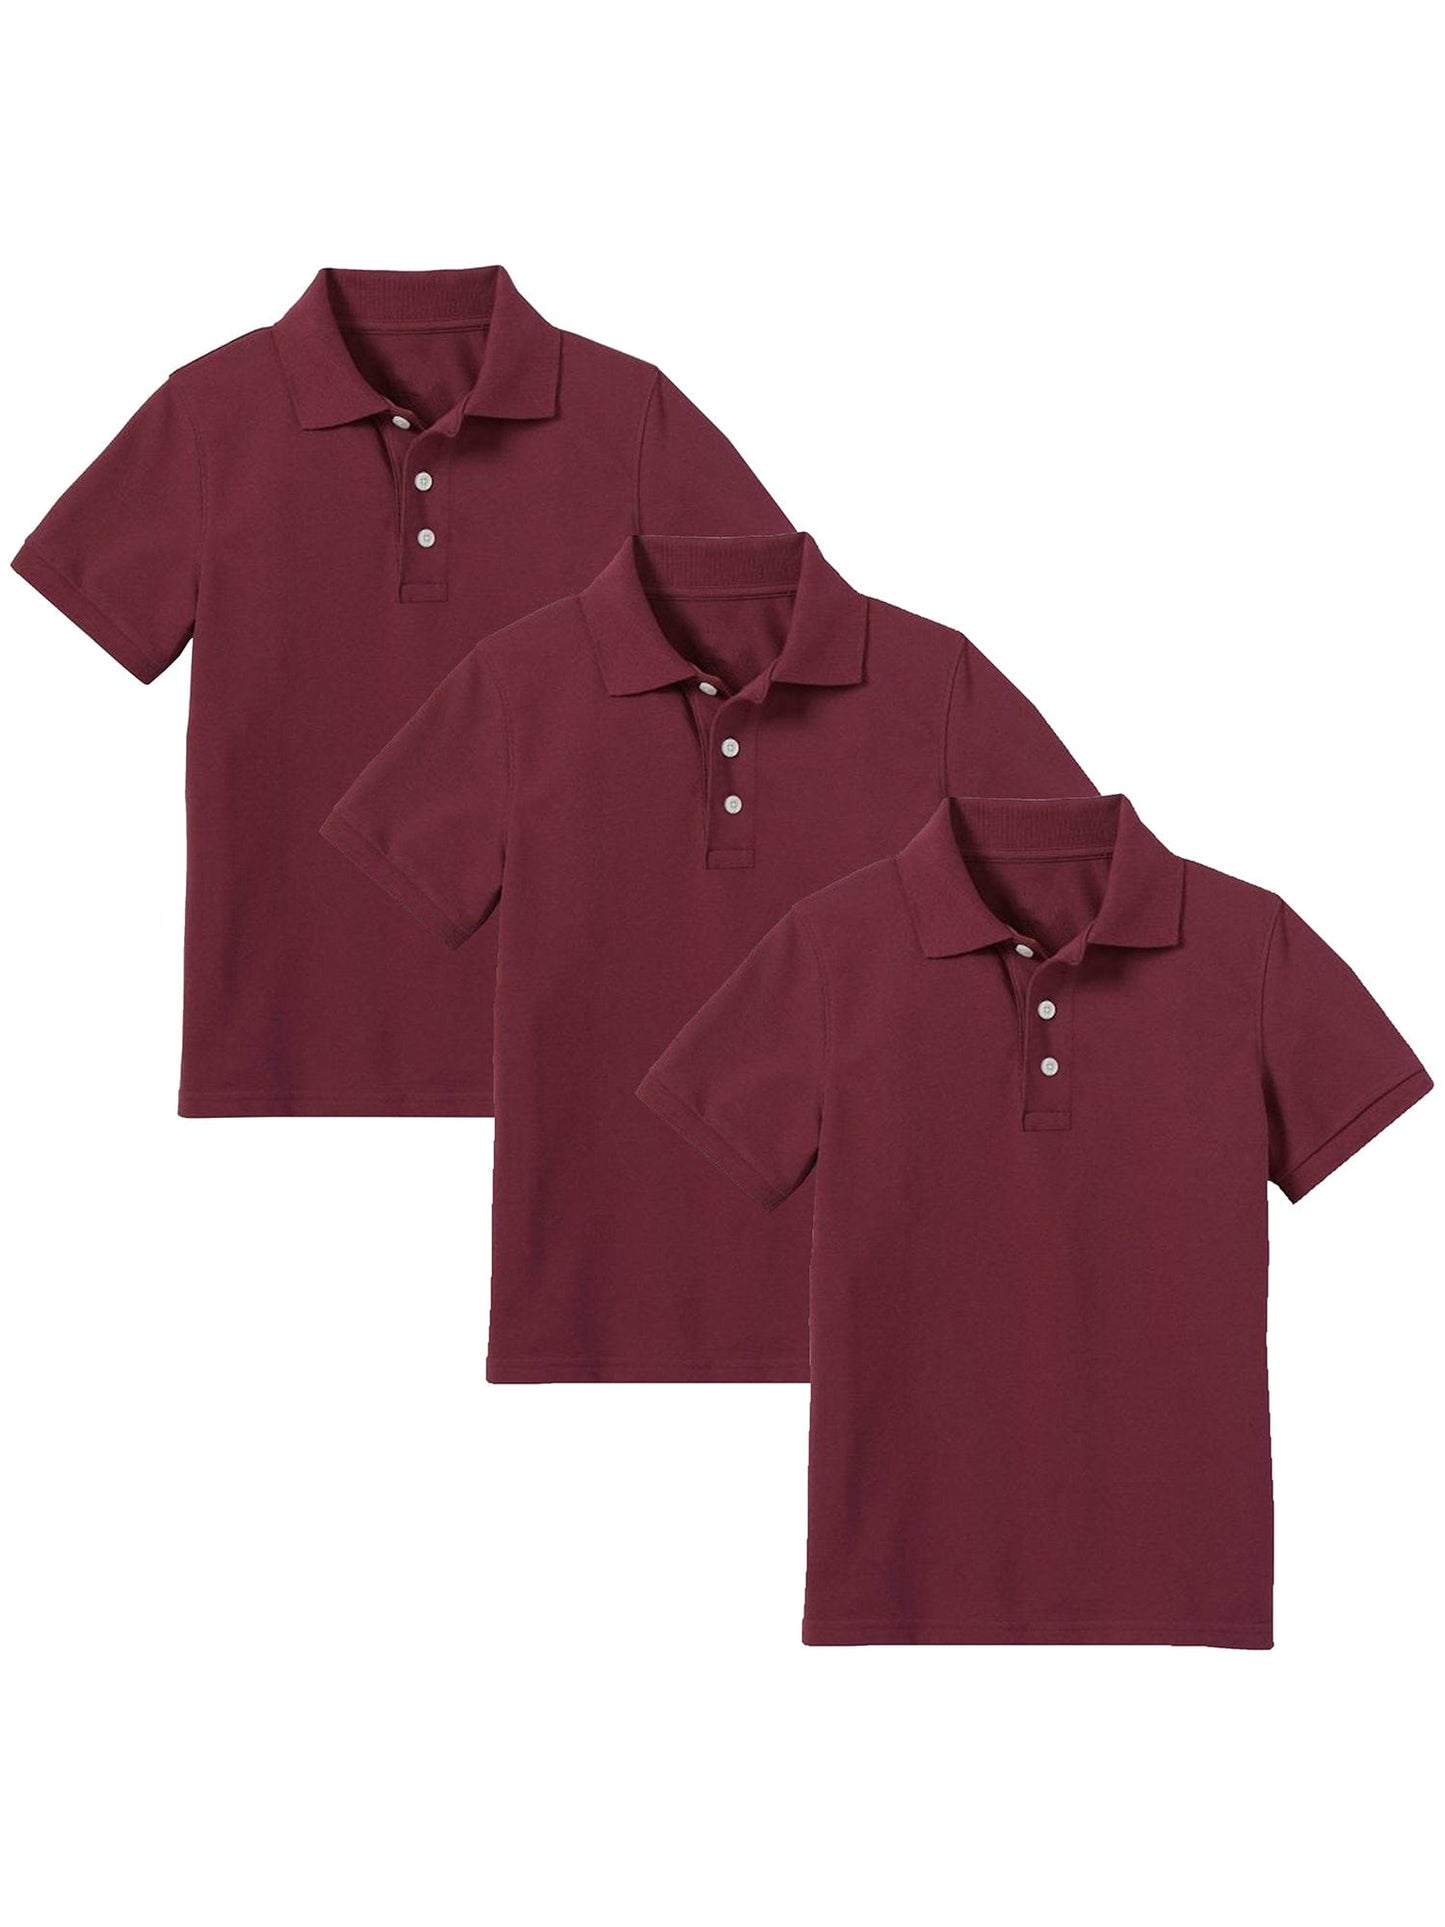 Boy's (3-PACK) Short Sleeve Polo Shirt (Sizes 8-20) - GalaxybyHarvic